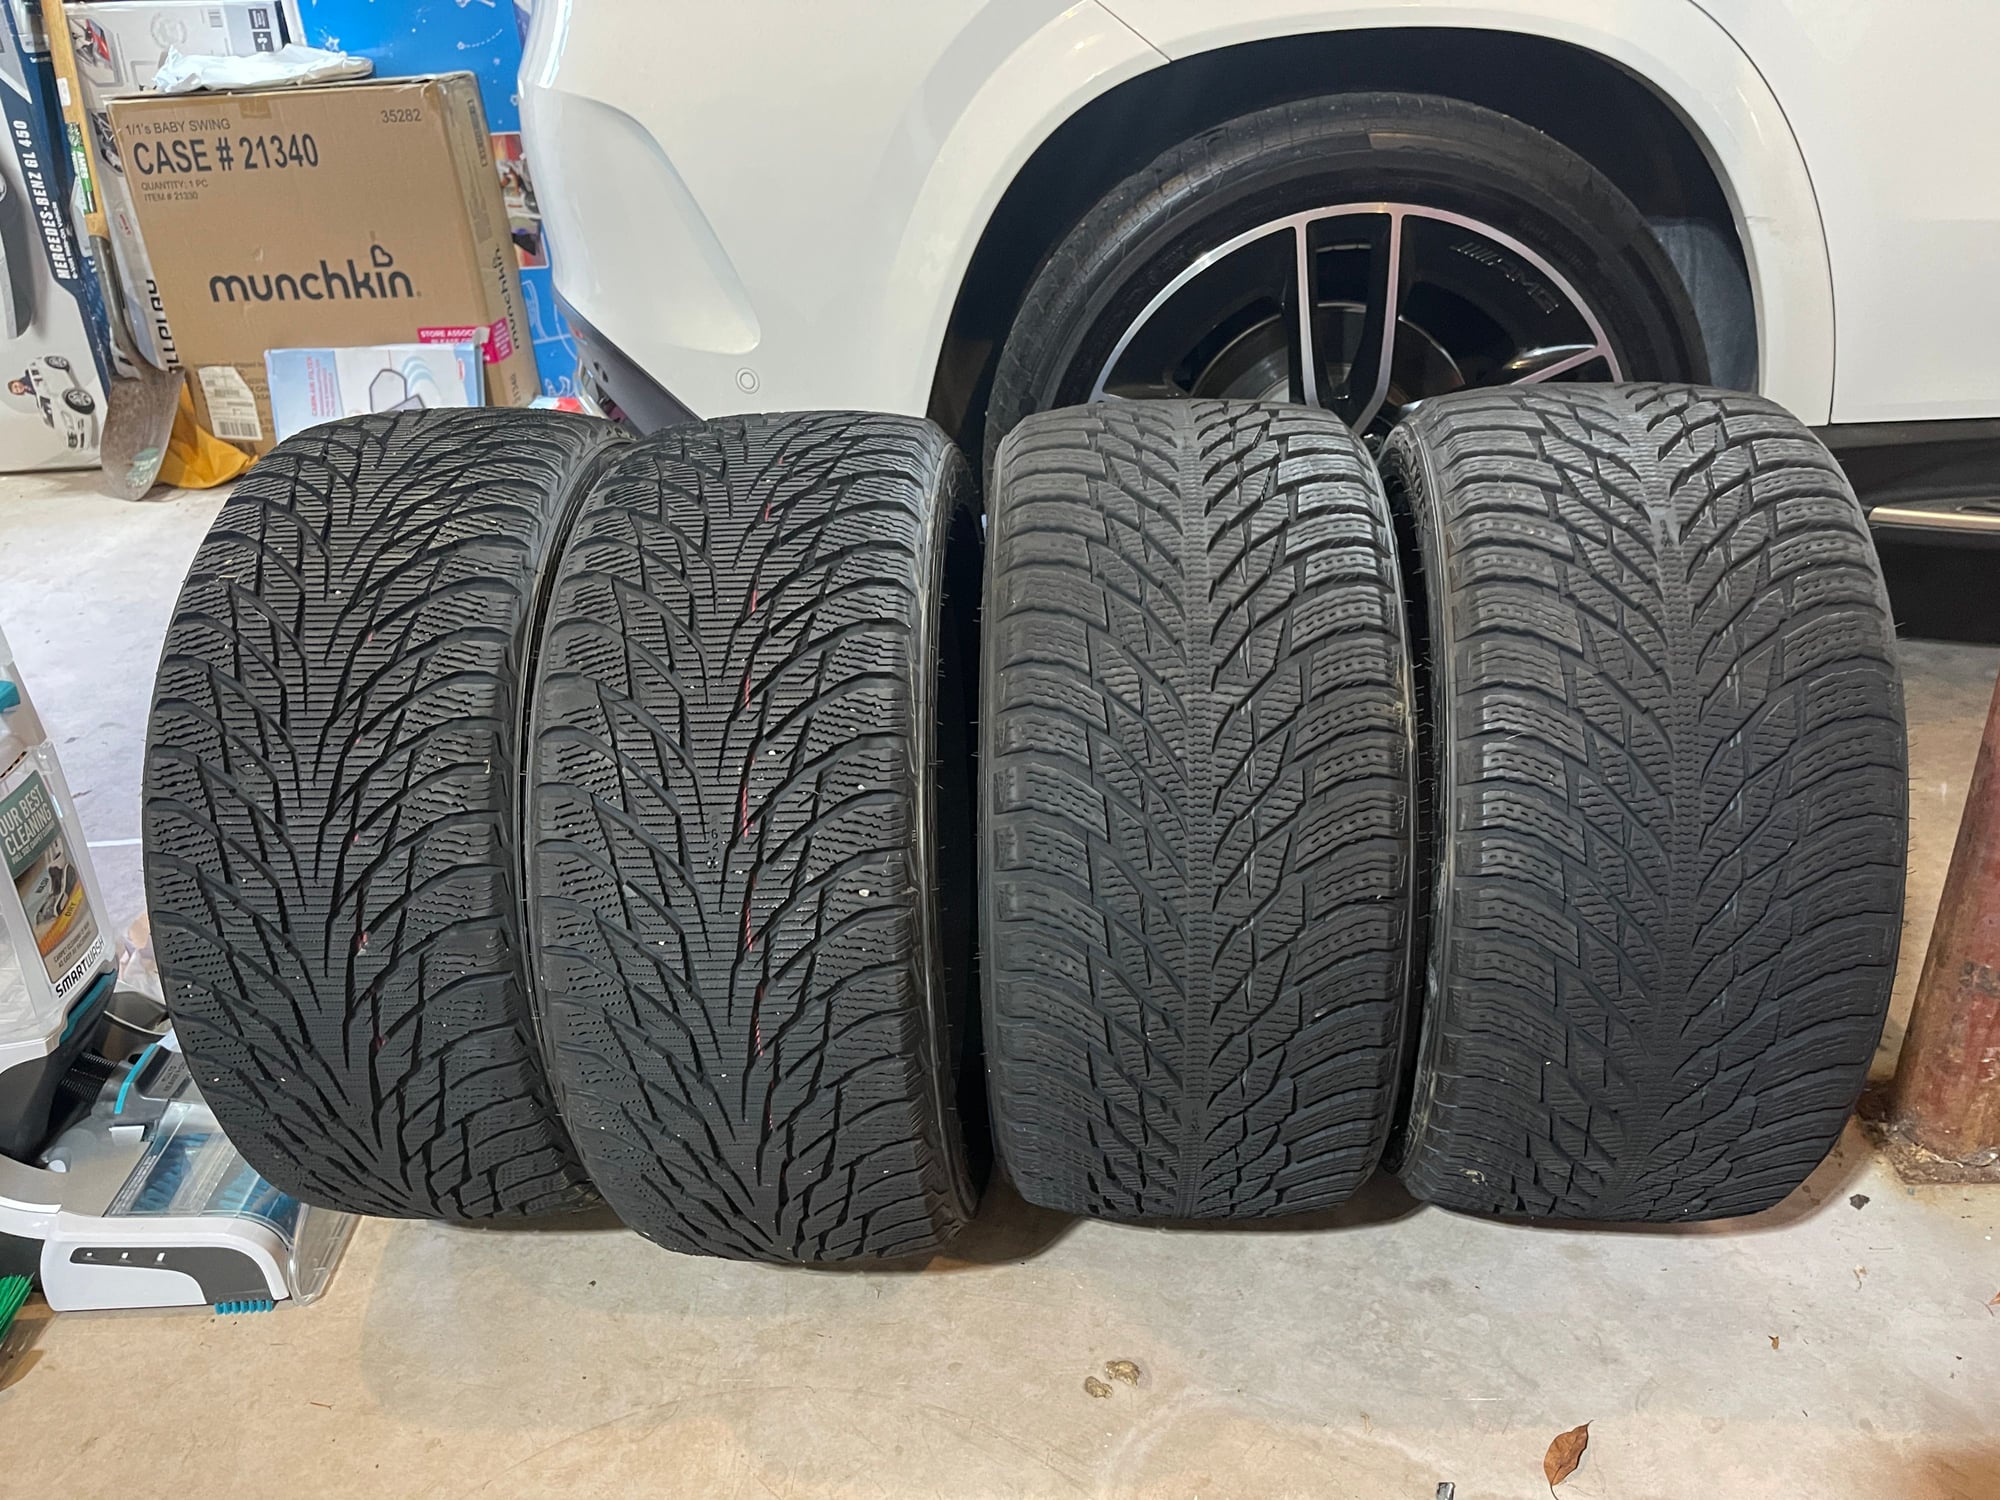 Wheels and Tires/Axles - FS: $500 Nokian Hakkapeliitta 18in Winter Tires (Staggered) - Used - All Years  All Models - Brooklyn, NY 11204, United States